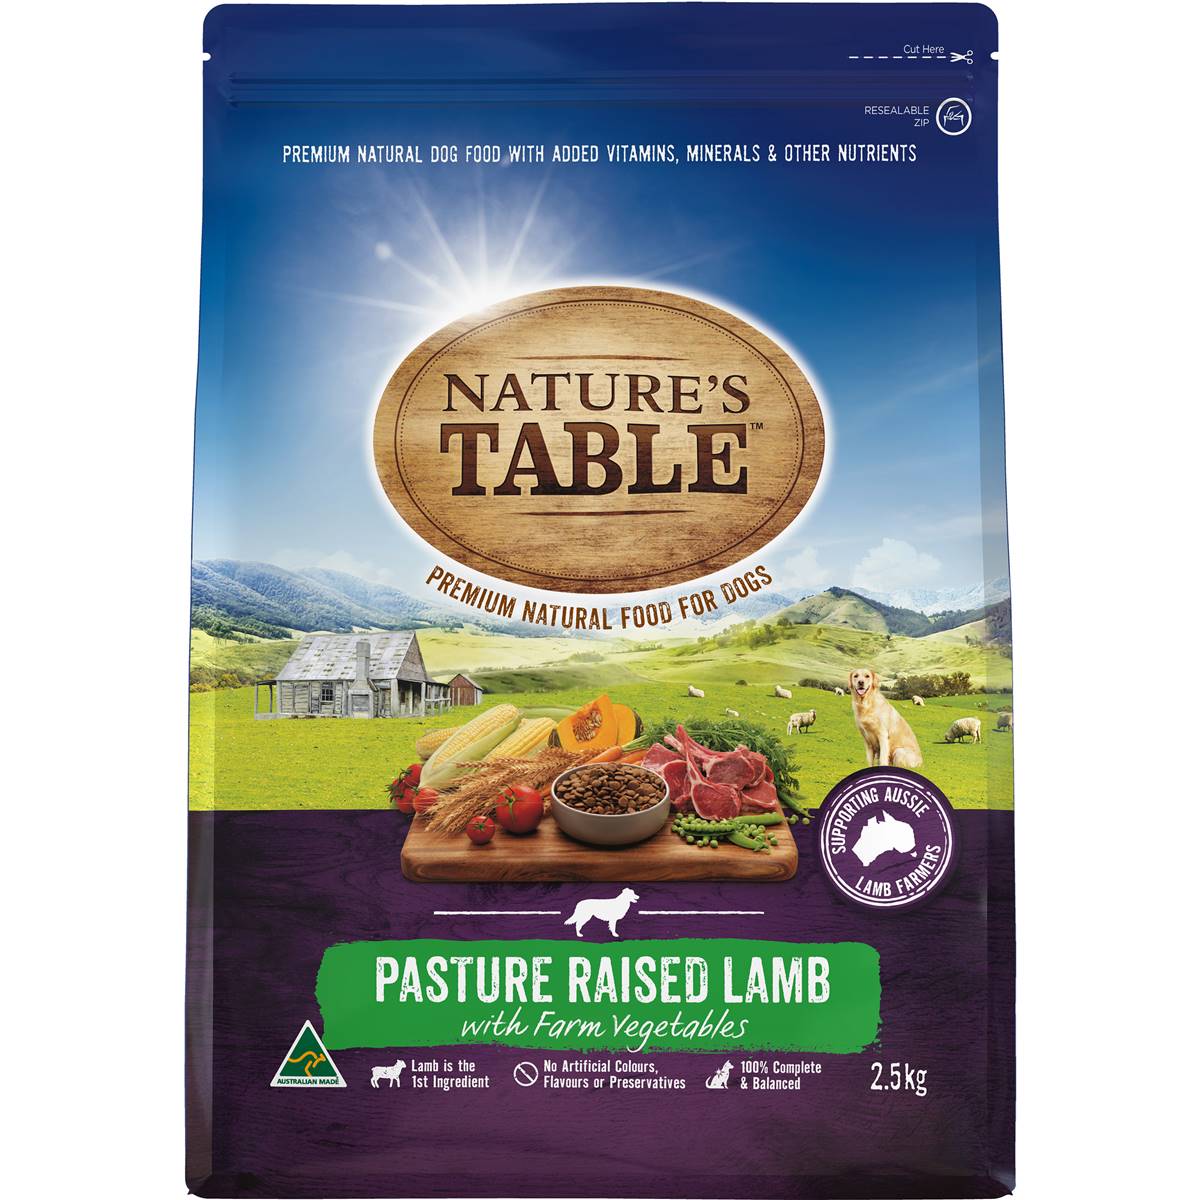 natures table dog food review